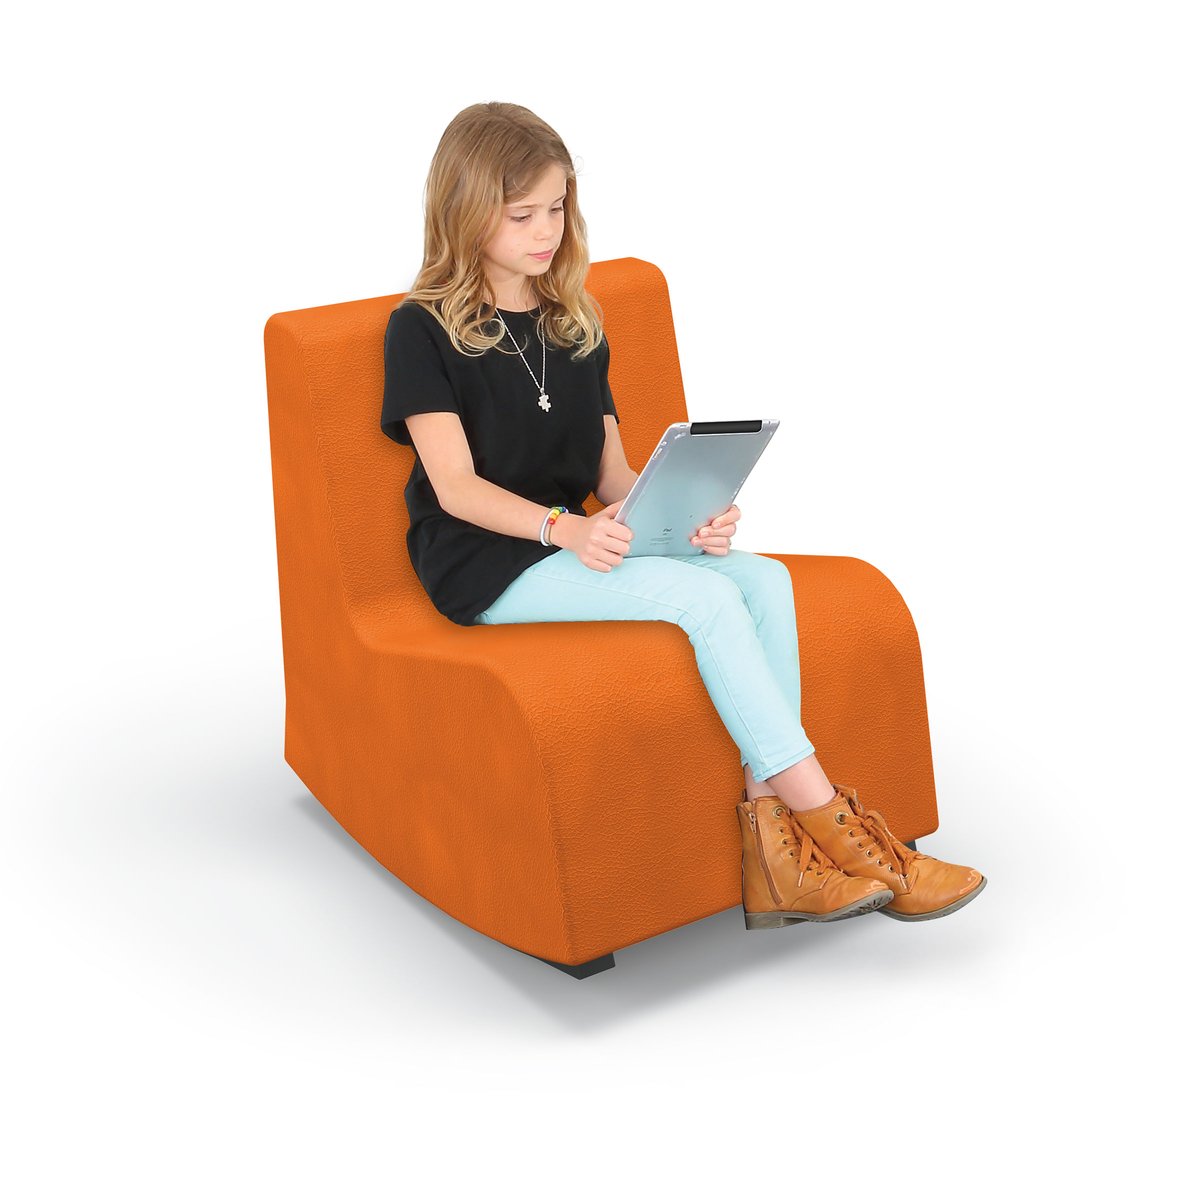 MooreCo soft seating rocking chair